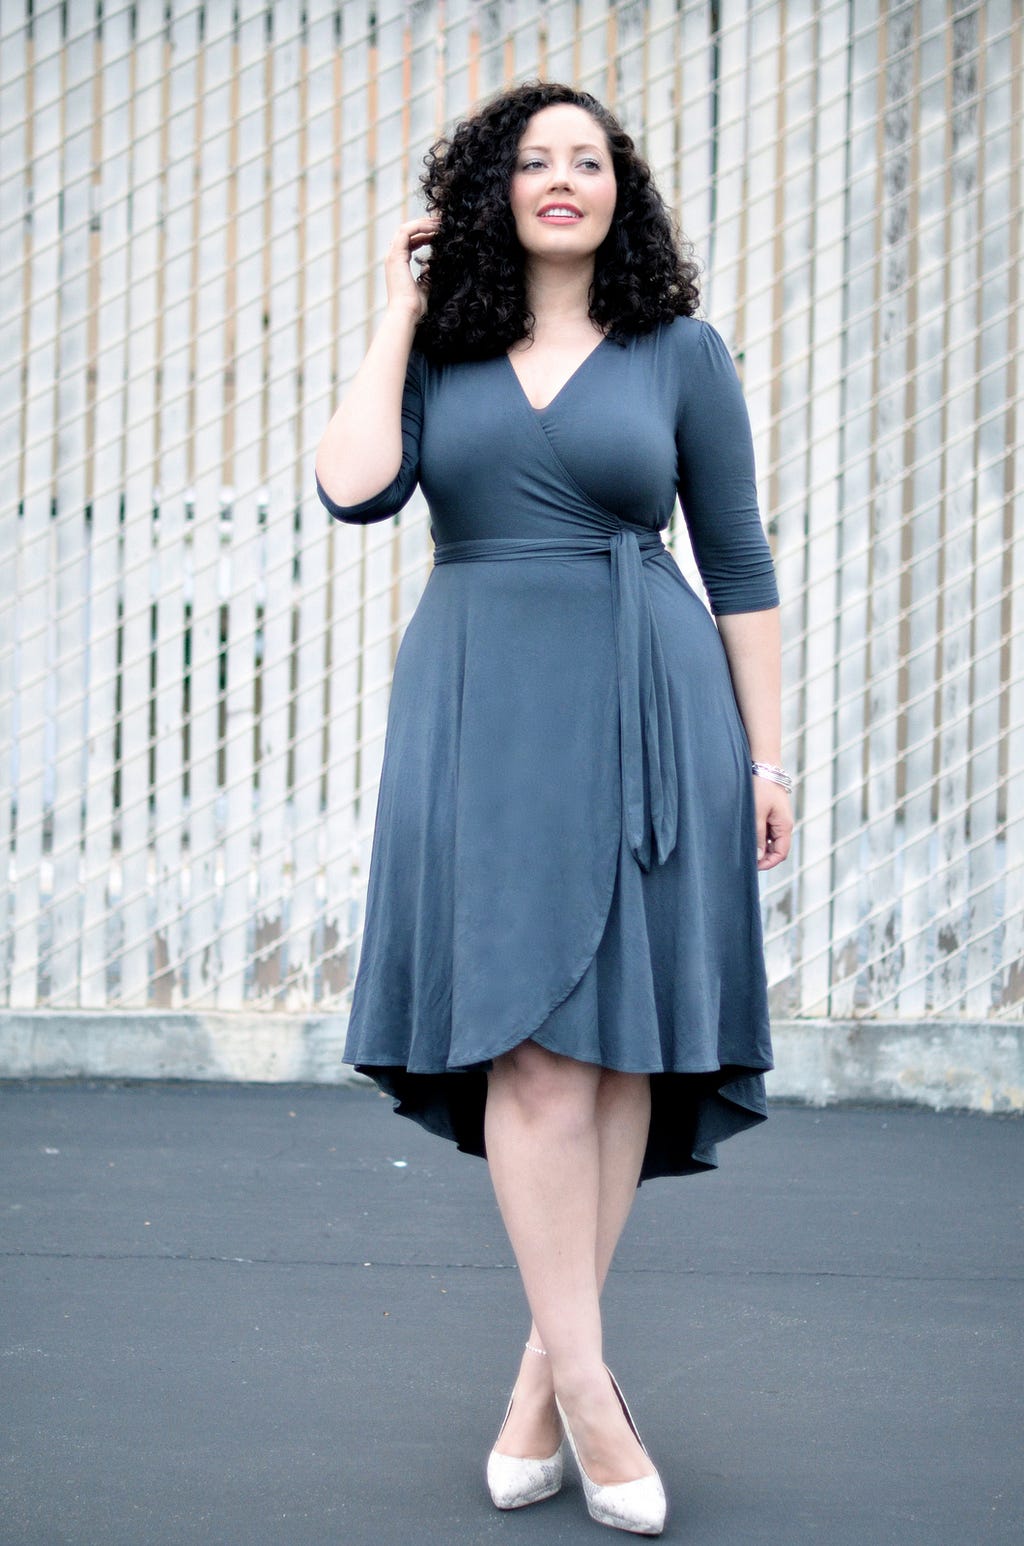 A Girl With Curves Blog: Embrace Your Chic Style!